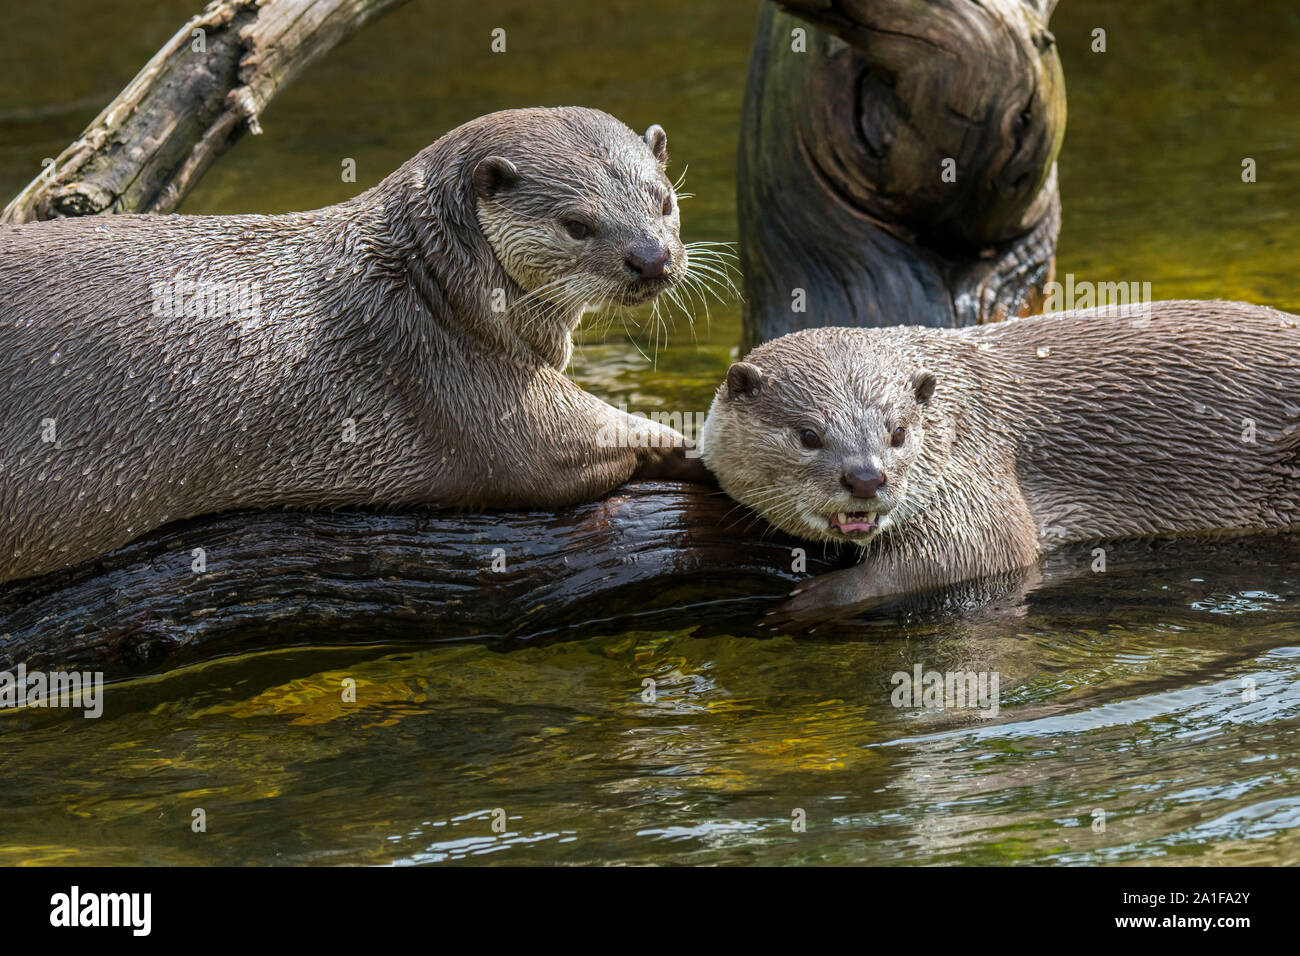 Two smooth-coated otters (Lutrogale perspicillata / Lutra perspicillata) in river native to the Indian subcontinent and Southeast Asia Stock Photo